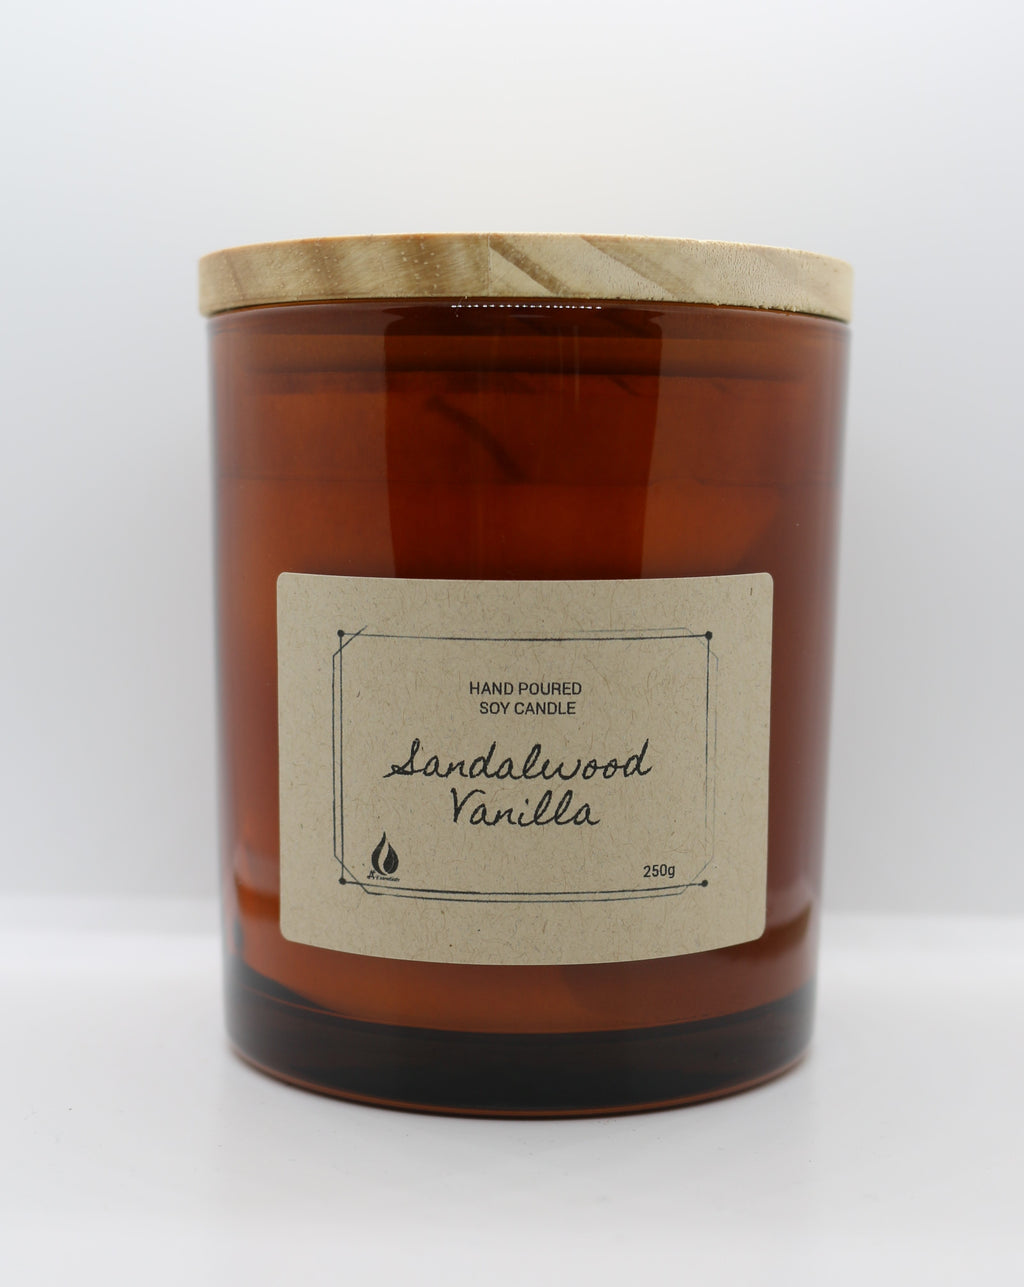 SANDALWOOD VANILLA - Hand Poured Soy Candle A+ Essentials Pty Ltd